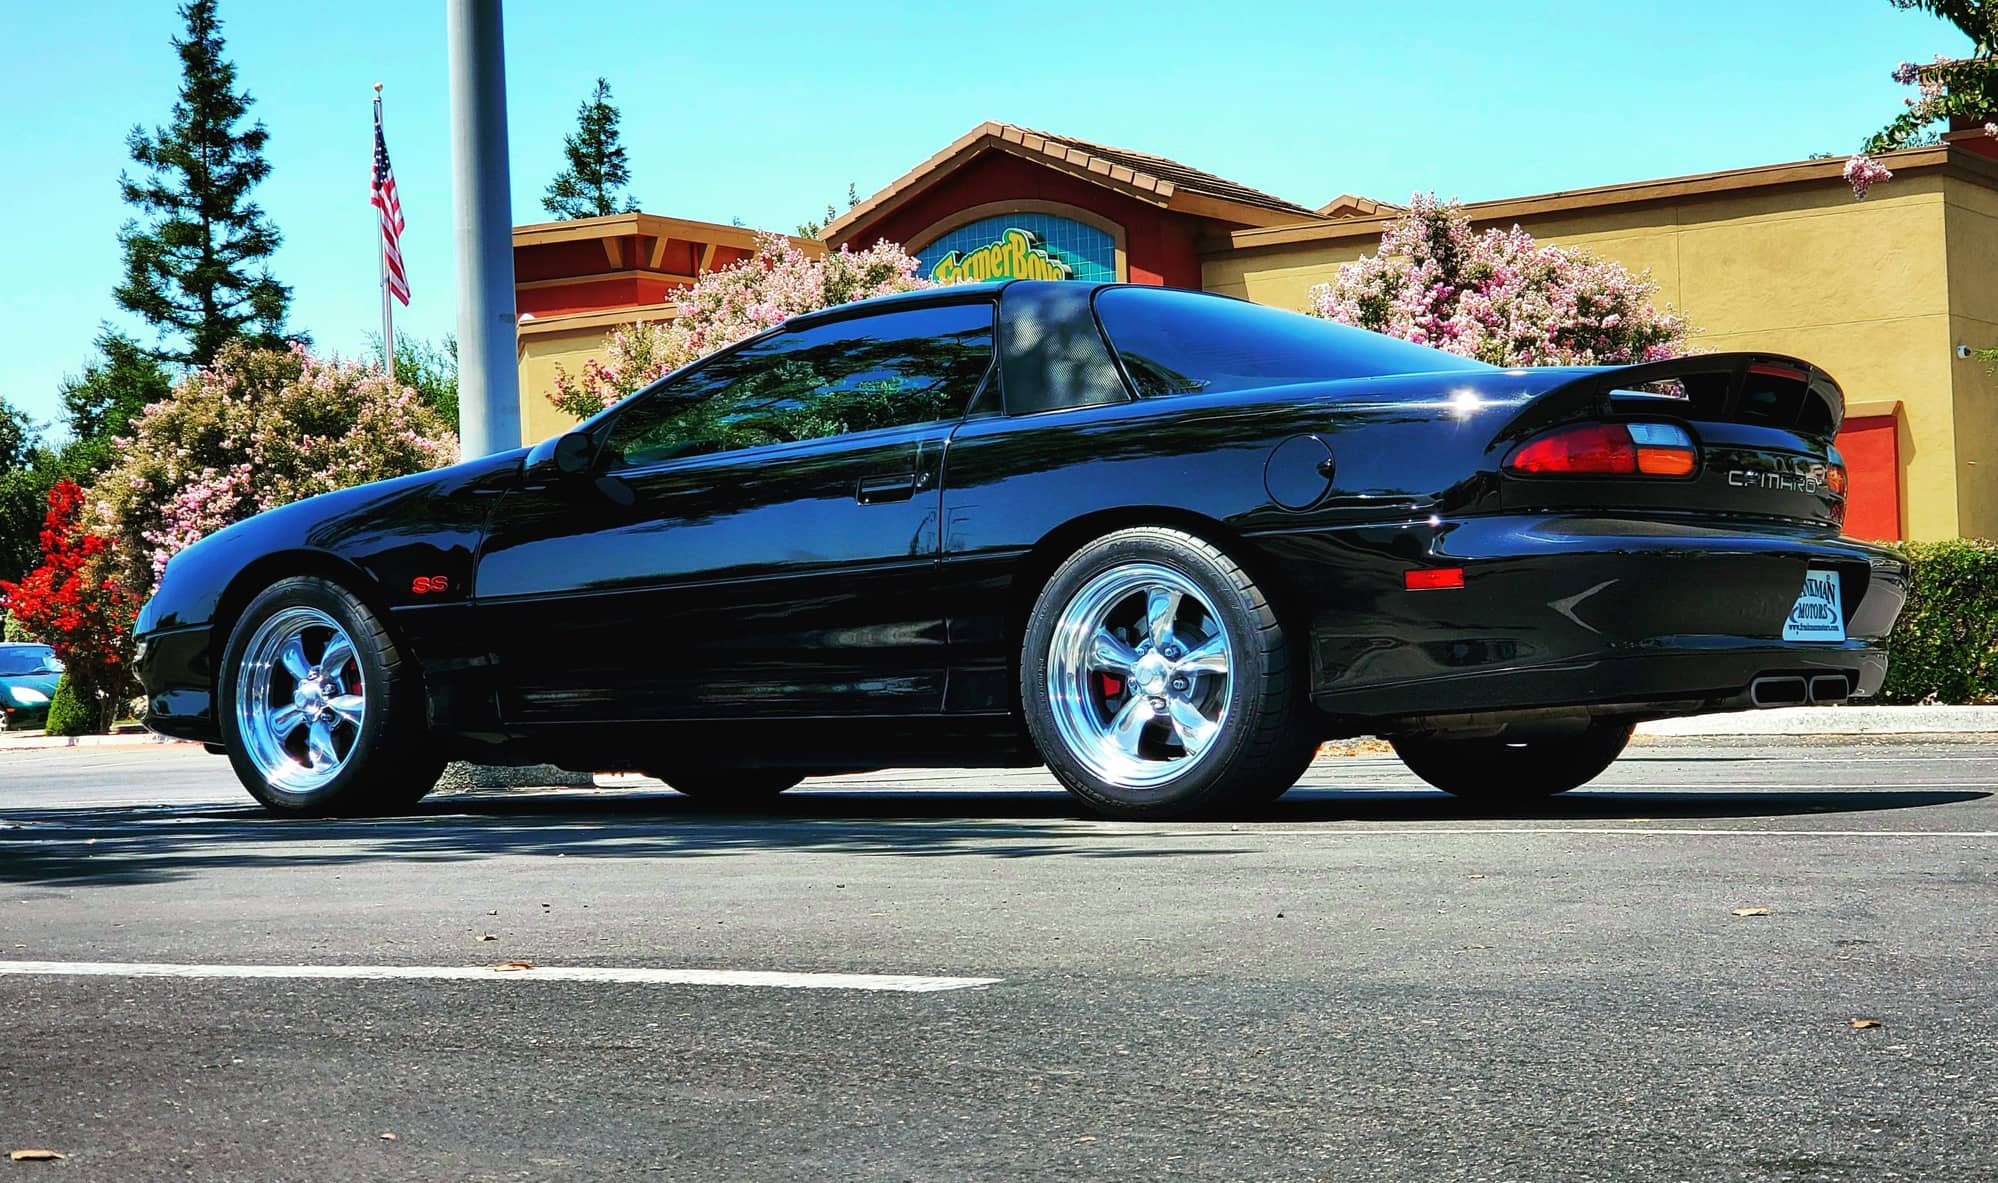 2001 Chevrolet Camaro - 2001, 6 Speed, 36k miles, 461RWHP - Used - VIN 2g1fp22g612138338 - 35,800 Miles - 8 cyl - 2WD - Manual - Coupe - Black - Fresno, CA 93611, United States